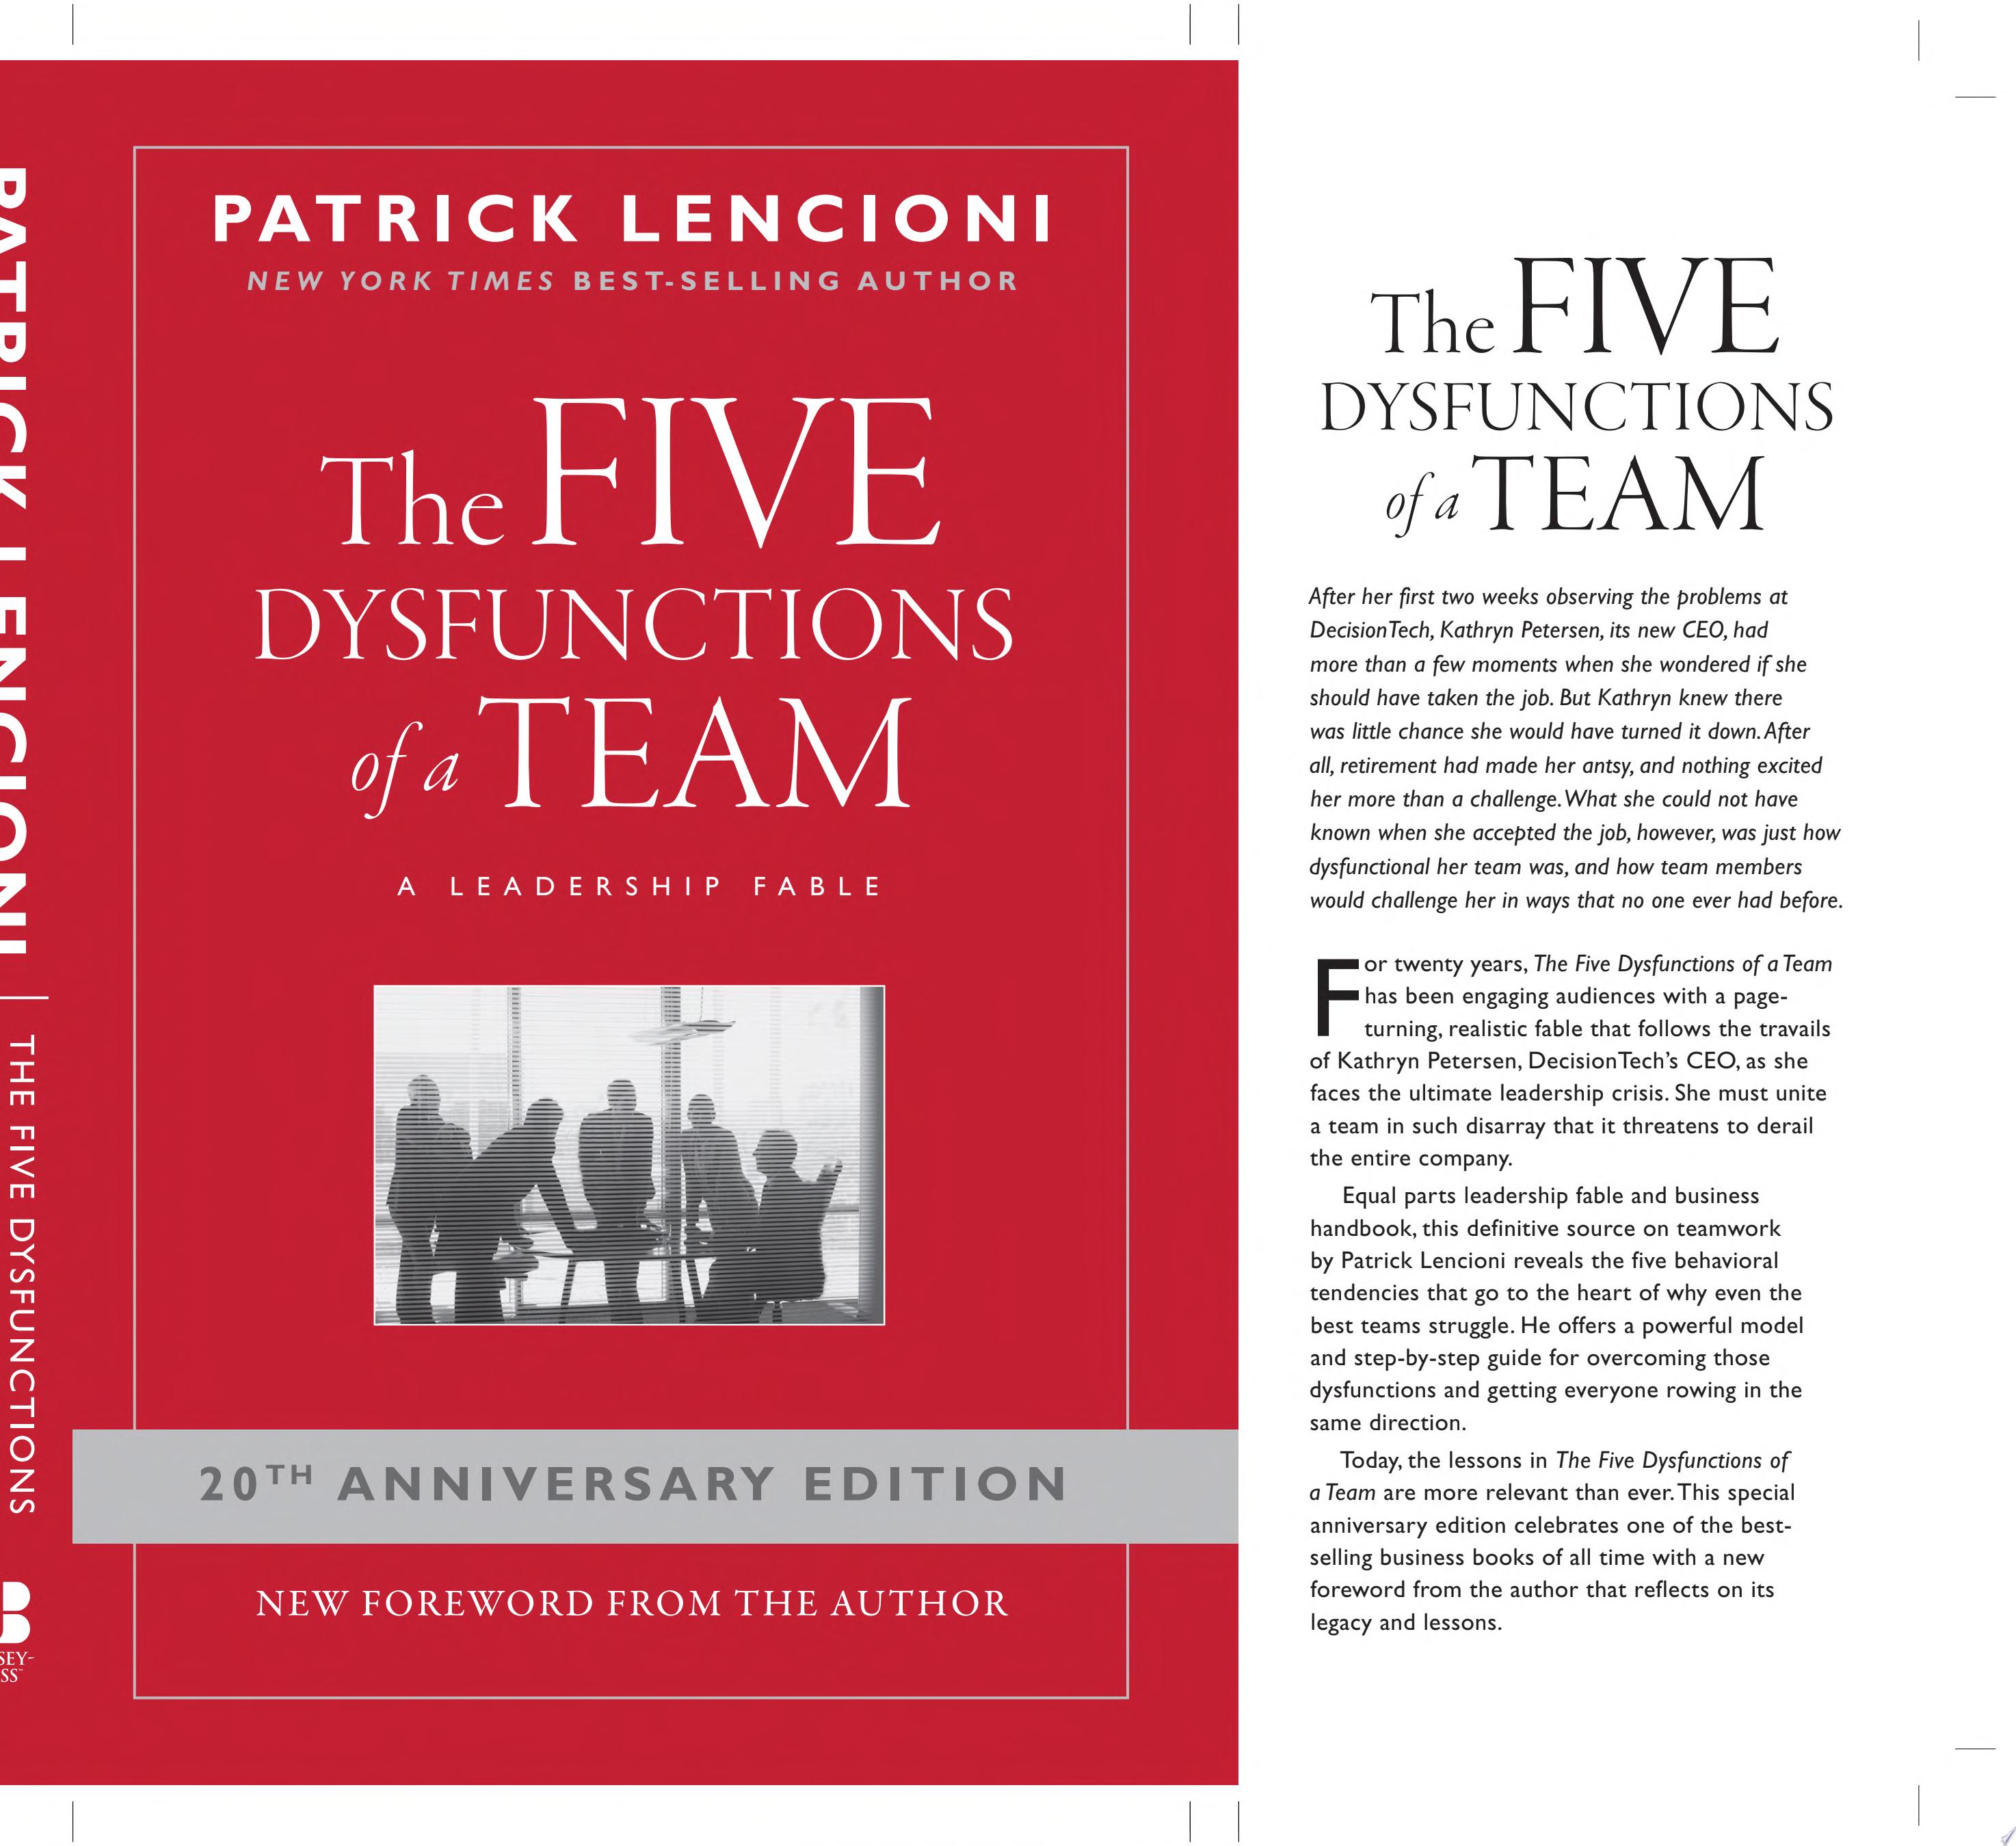 Image for "The Five Dysfunctions of a Team"